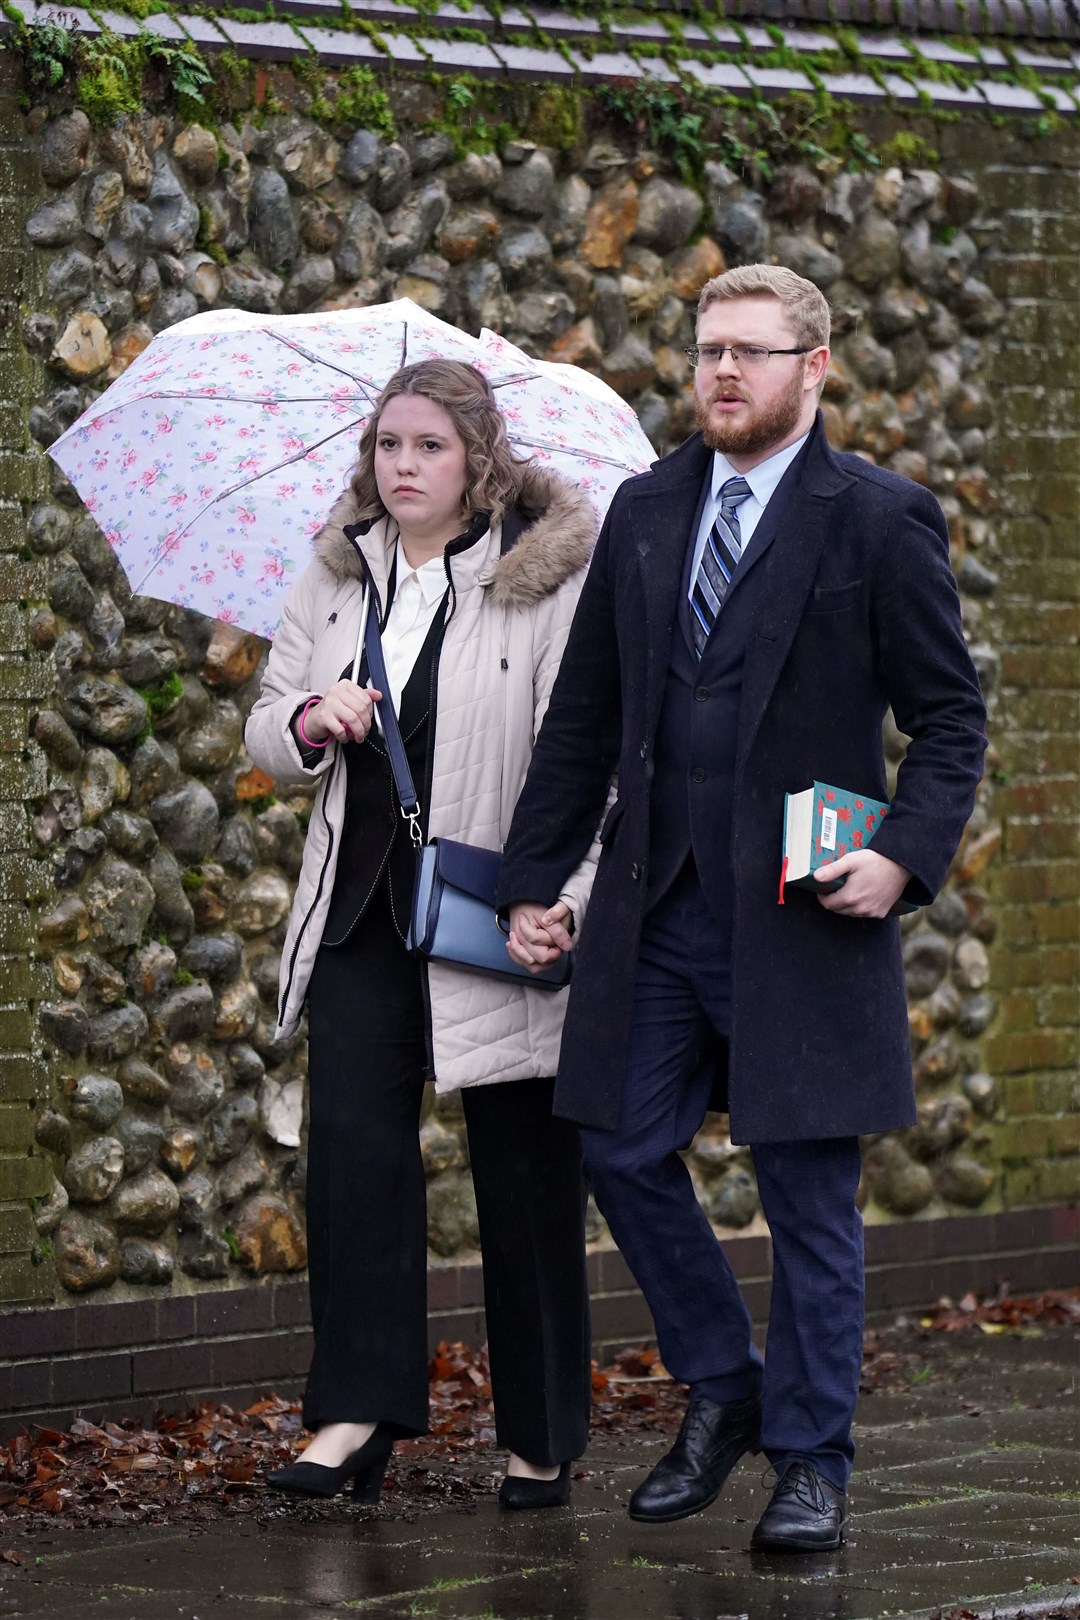 Airman first class Mikayla Hayes (left), who was cleared at Norwich Crown Court of causing the death of motorcyclist Matthew Day by careless driving (Joe Giddens/PA)